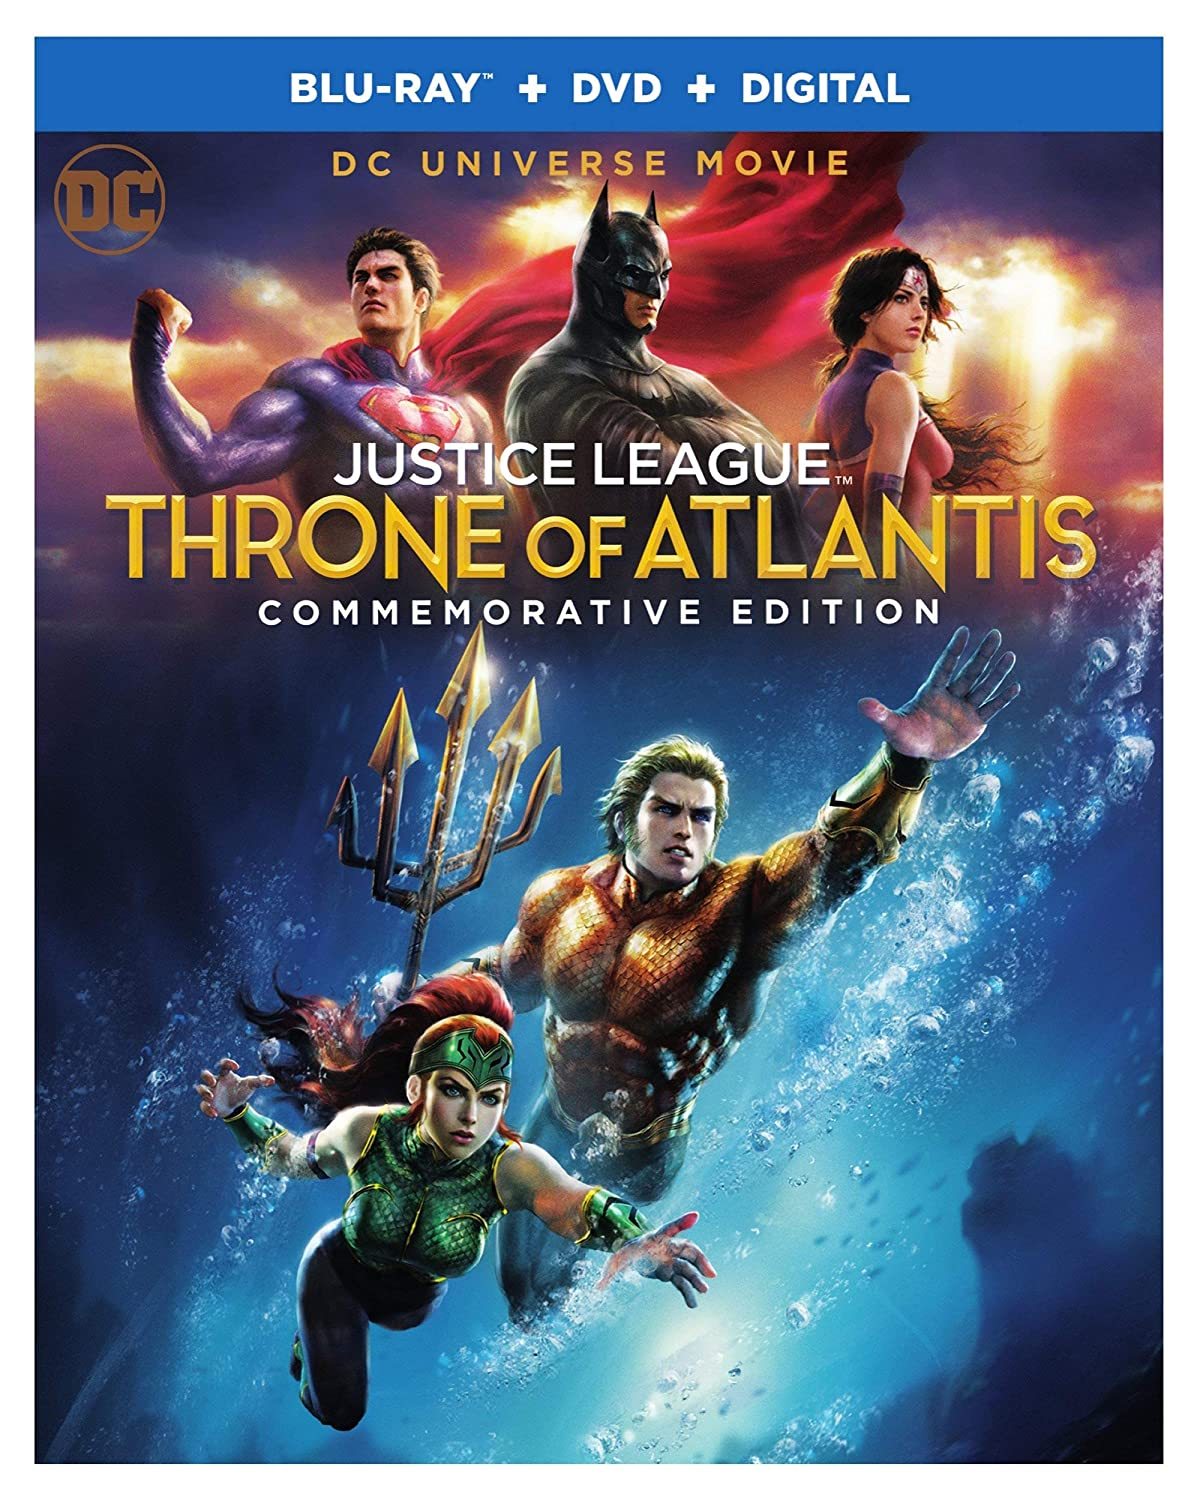 Primary image for Throne of Atlantis Commemorative Blu-ray + DVD Digital Code MAY BE EXPIRED NEW